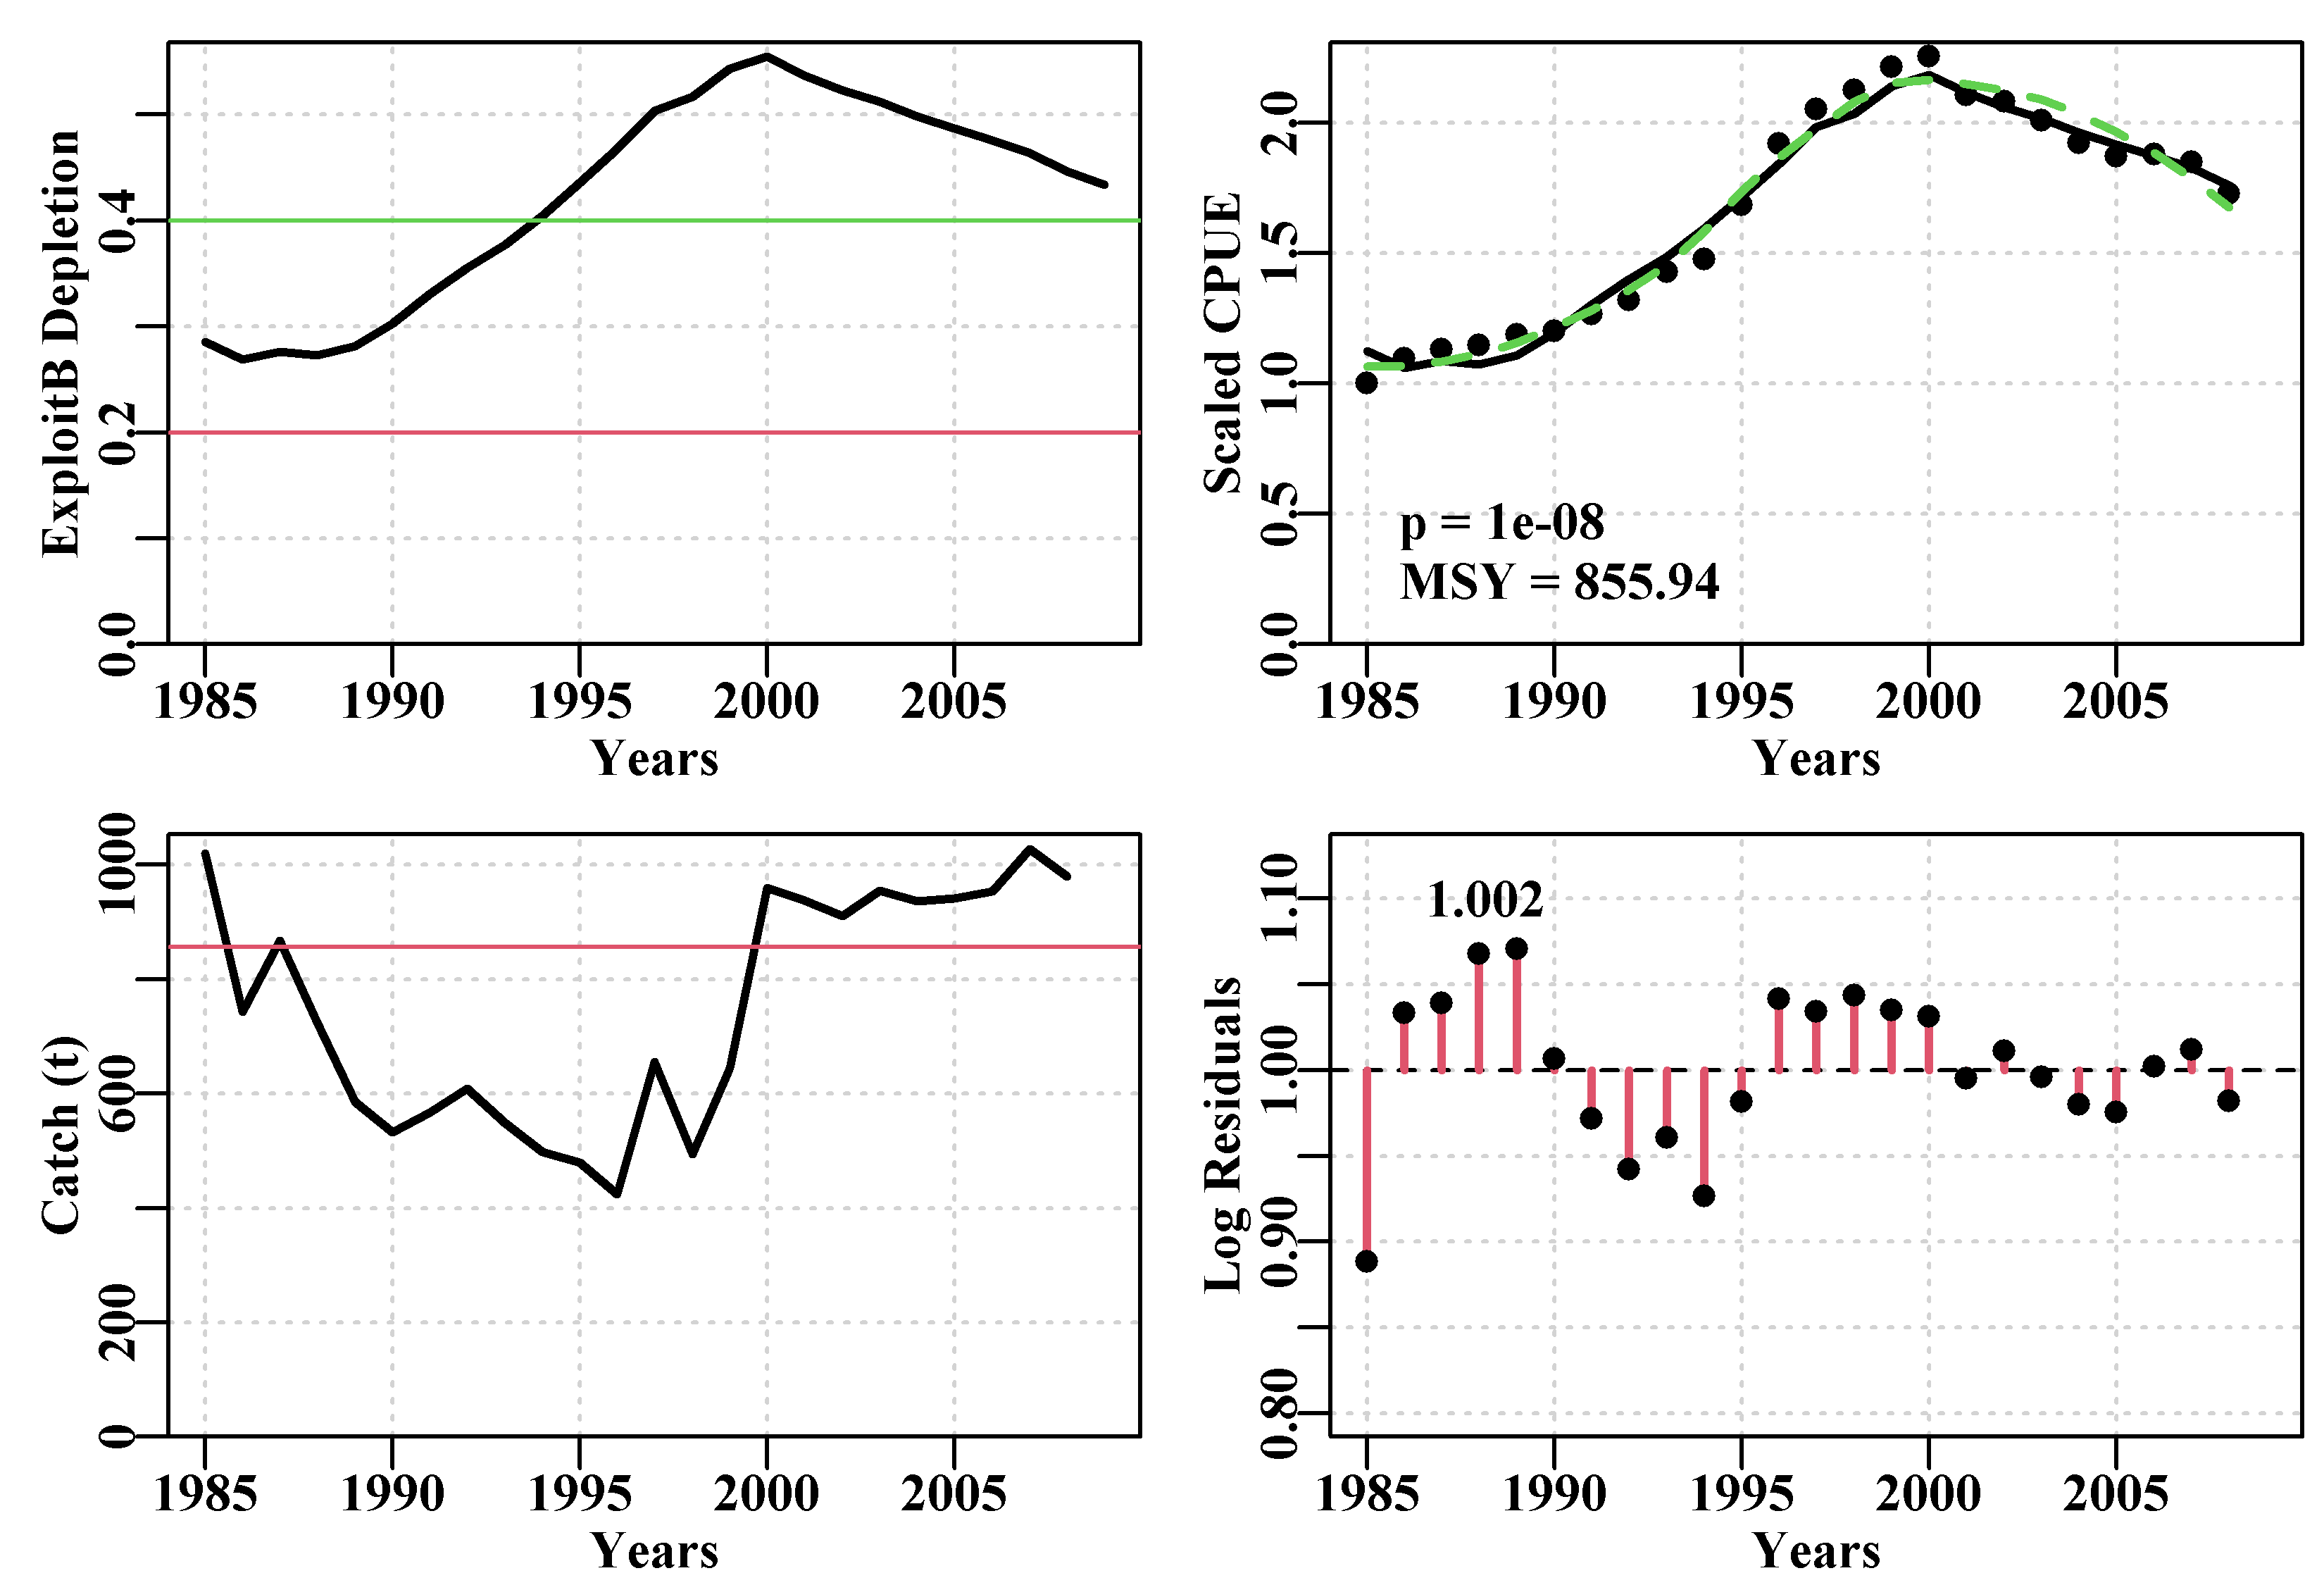 The optimum model fit for the abdat data-set using the Fox model and log-normal errors. The green dashed line is a loess curve while the solid red line is the optimum predicted model fit. Note the pattern in the log-normal residuals indicating that the model has some inadequacies with regard to this data.